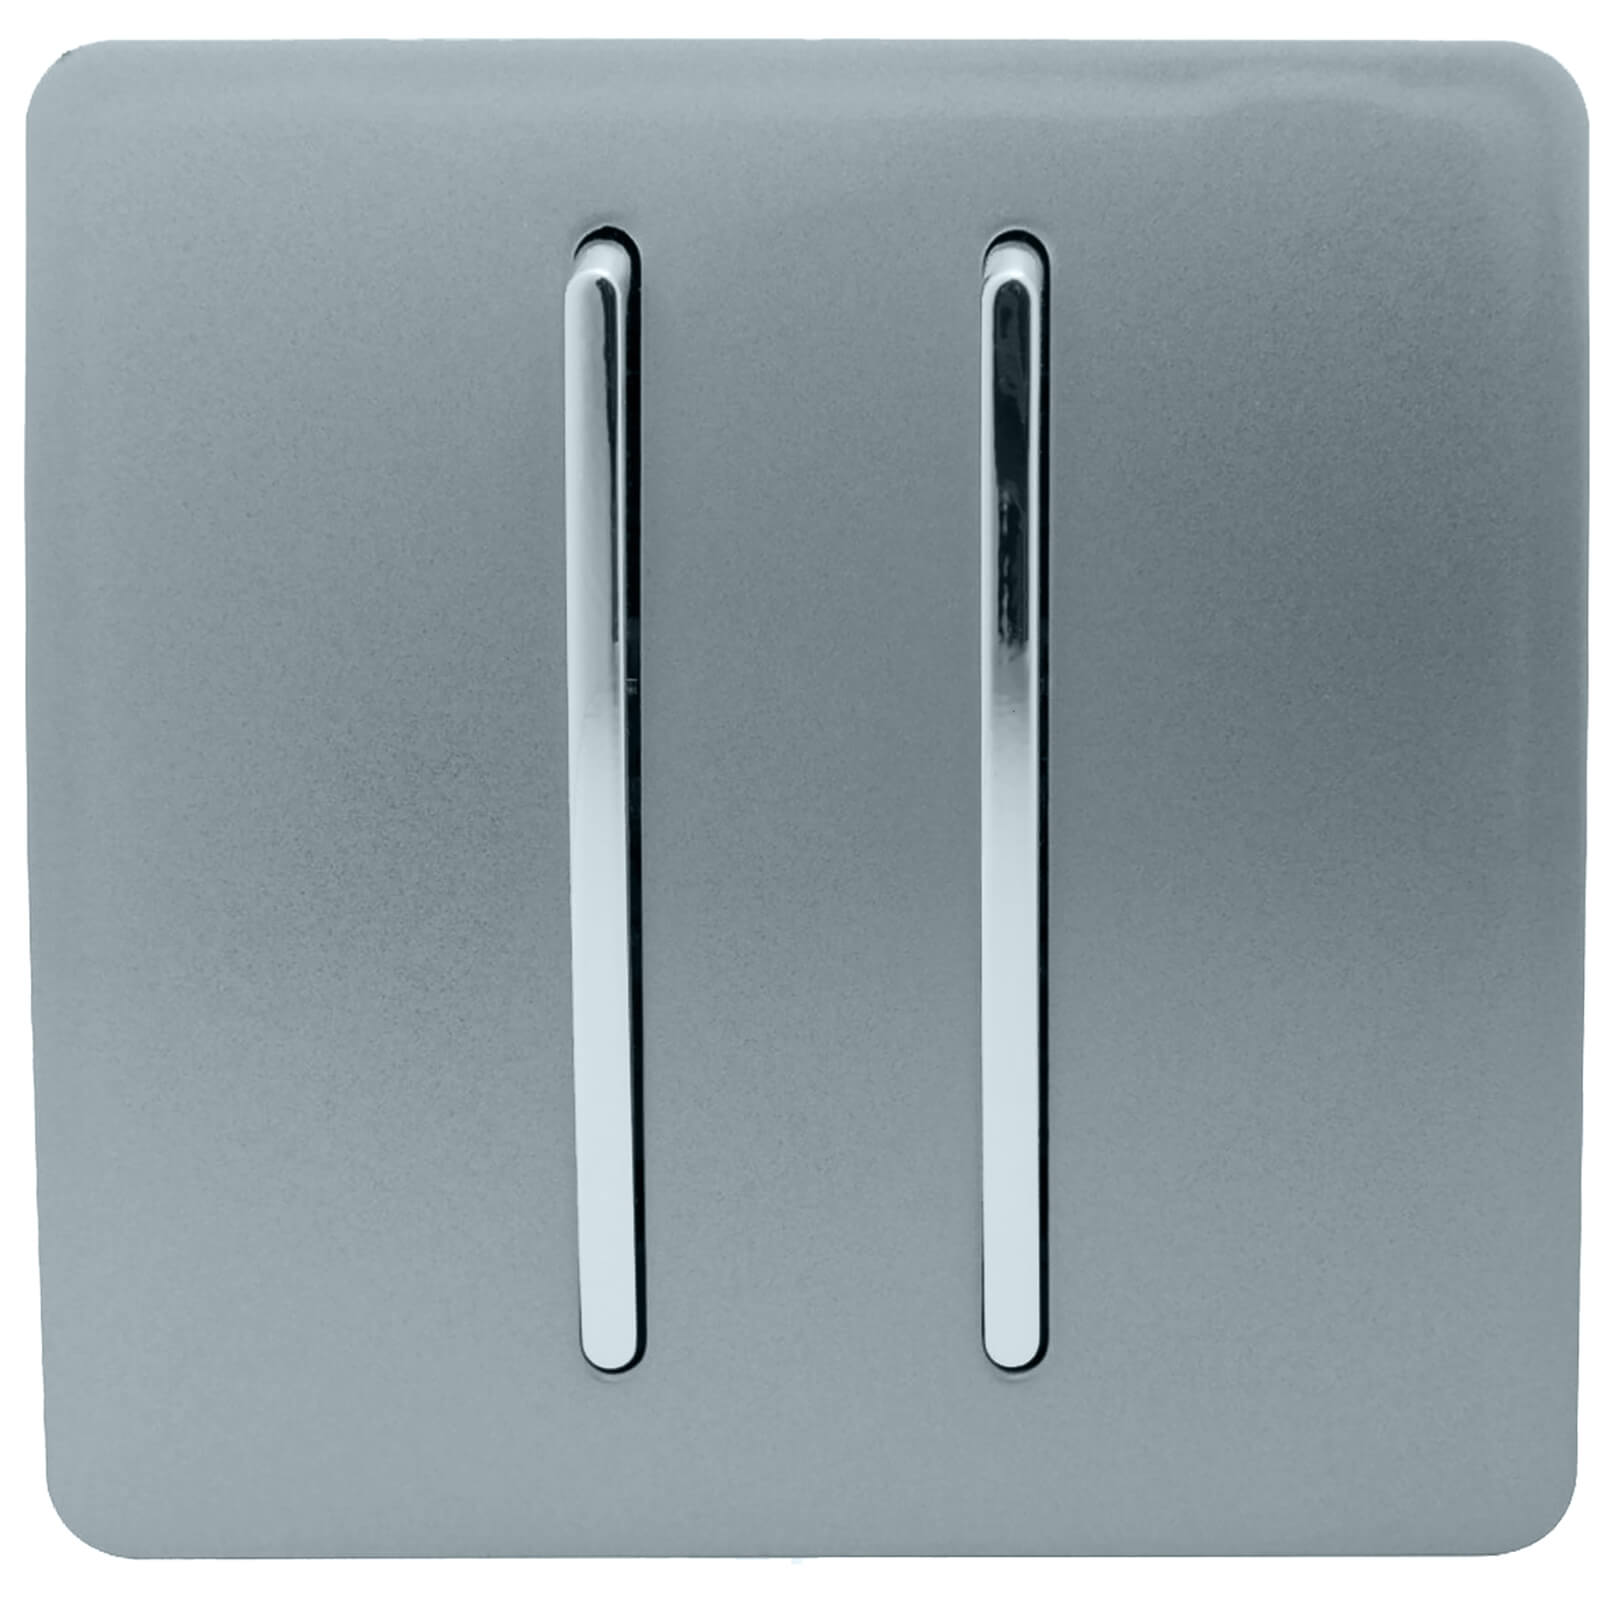 Trendi Switch 2 Gang 2 Way 10Amp Light Switch in Cool Grey